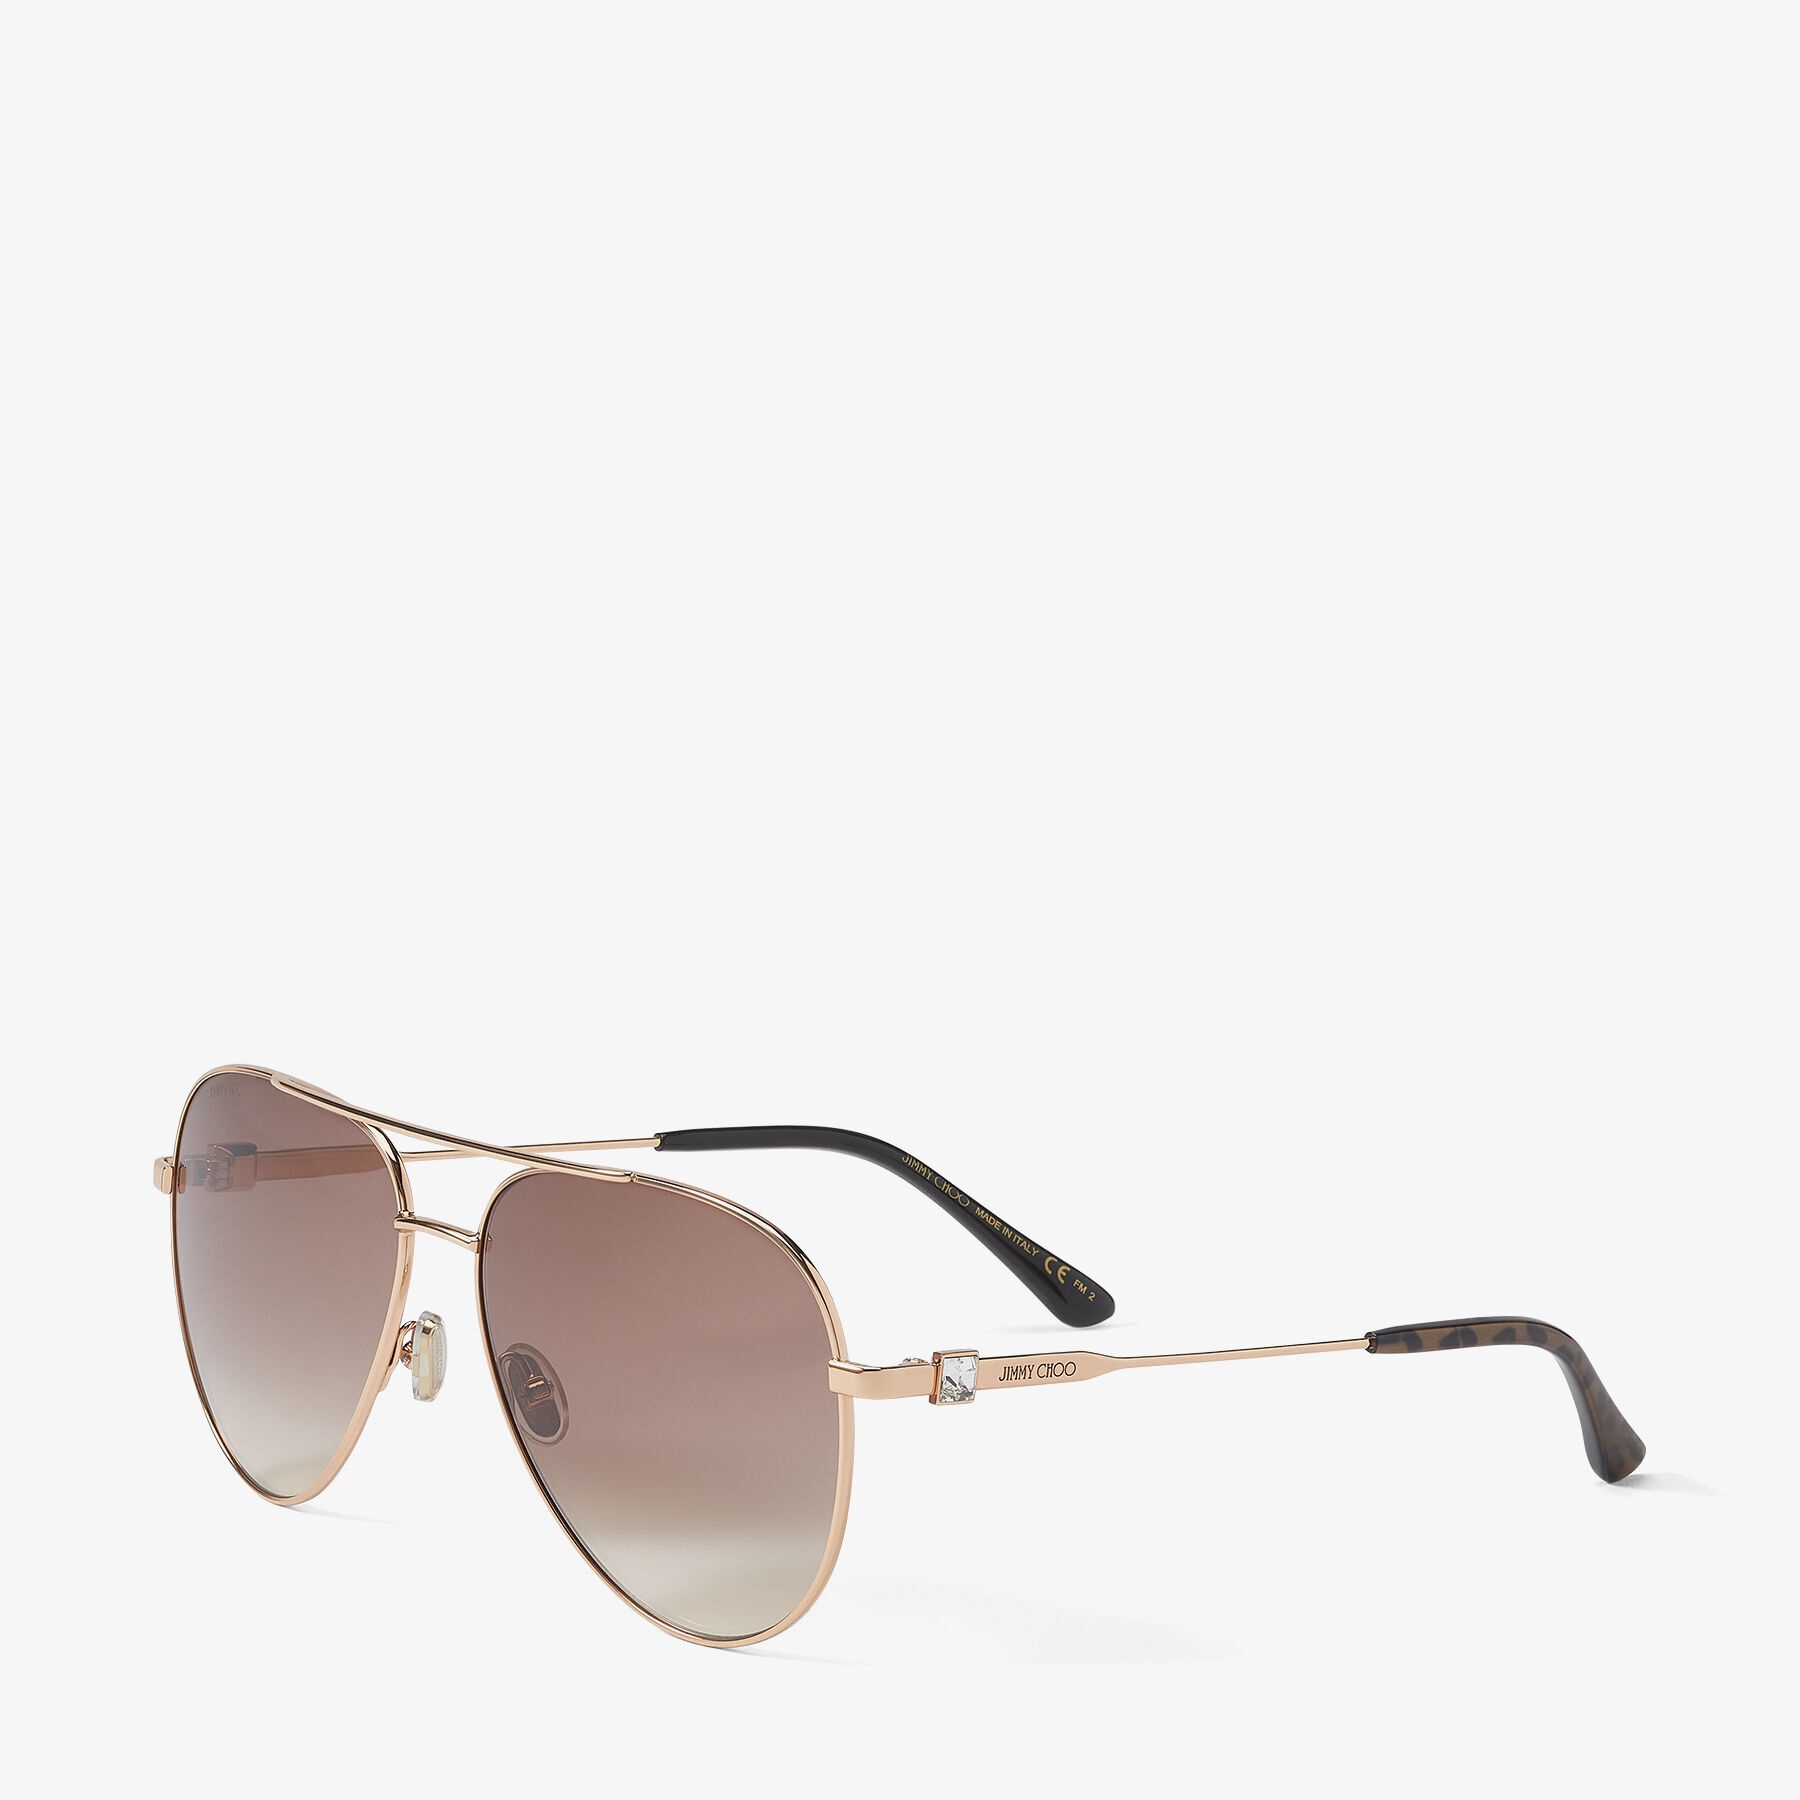 Olly
Copper Gold Aviator Sunglasses with Brown Shaded Lenses and Crystal Embellishment - 3